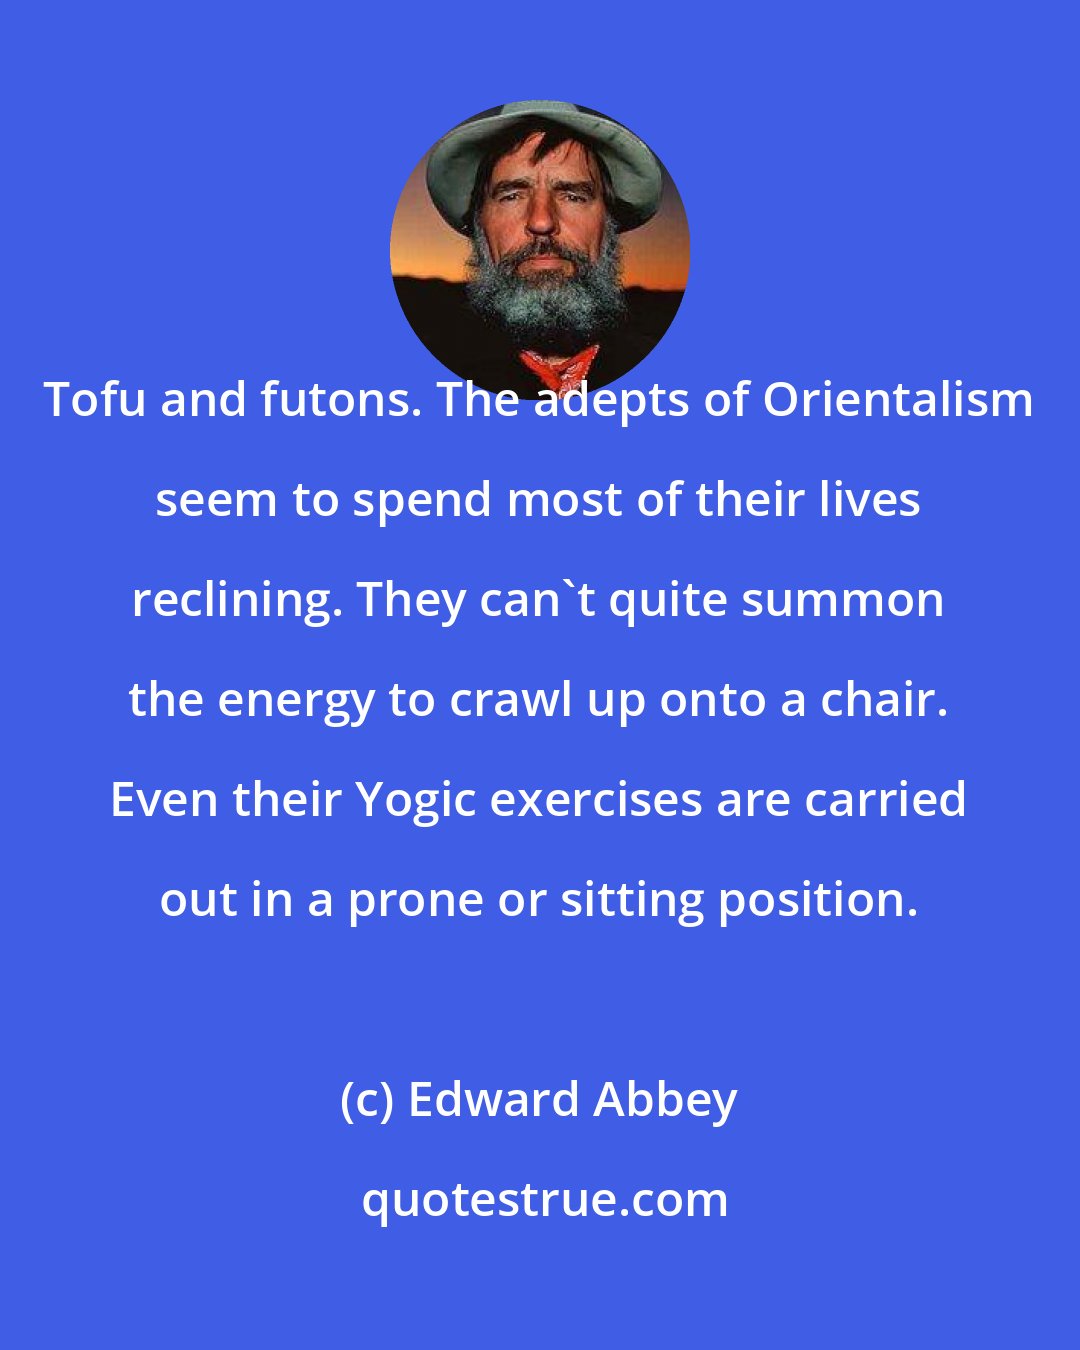 Edward Abbey: Tofu and futons. The adepts of Orientalism seem to spend most of their lives reclining. They can't quite summon the energy to crawl up onto a chair. Even their Yogic exercises are carried out in a prone or sitting position.